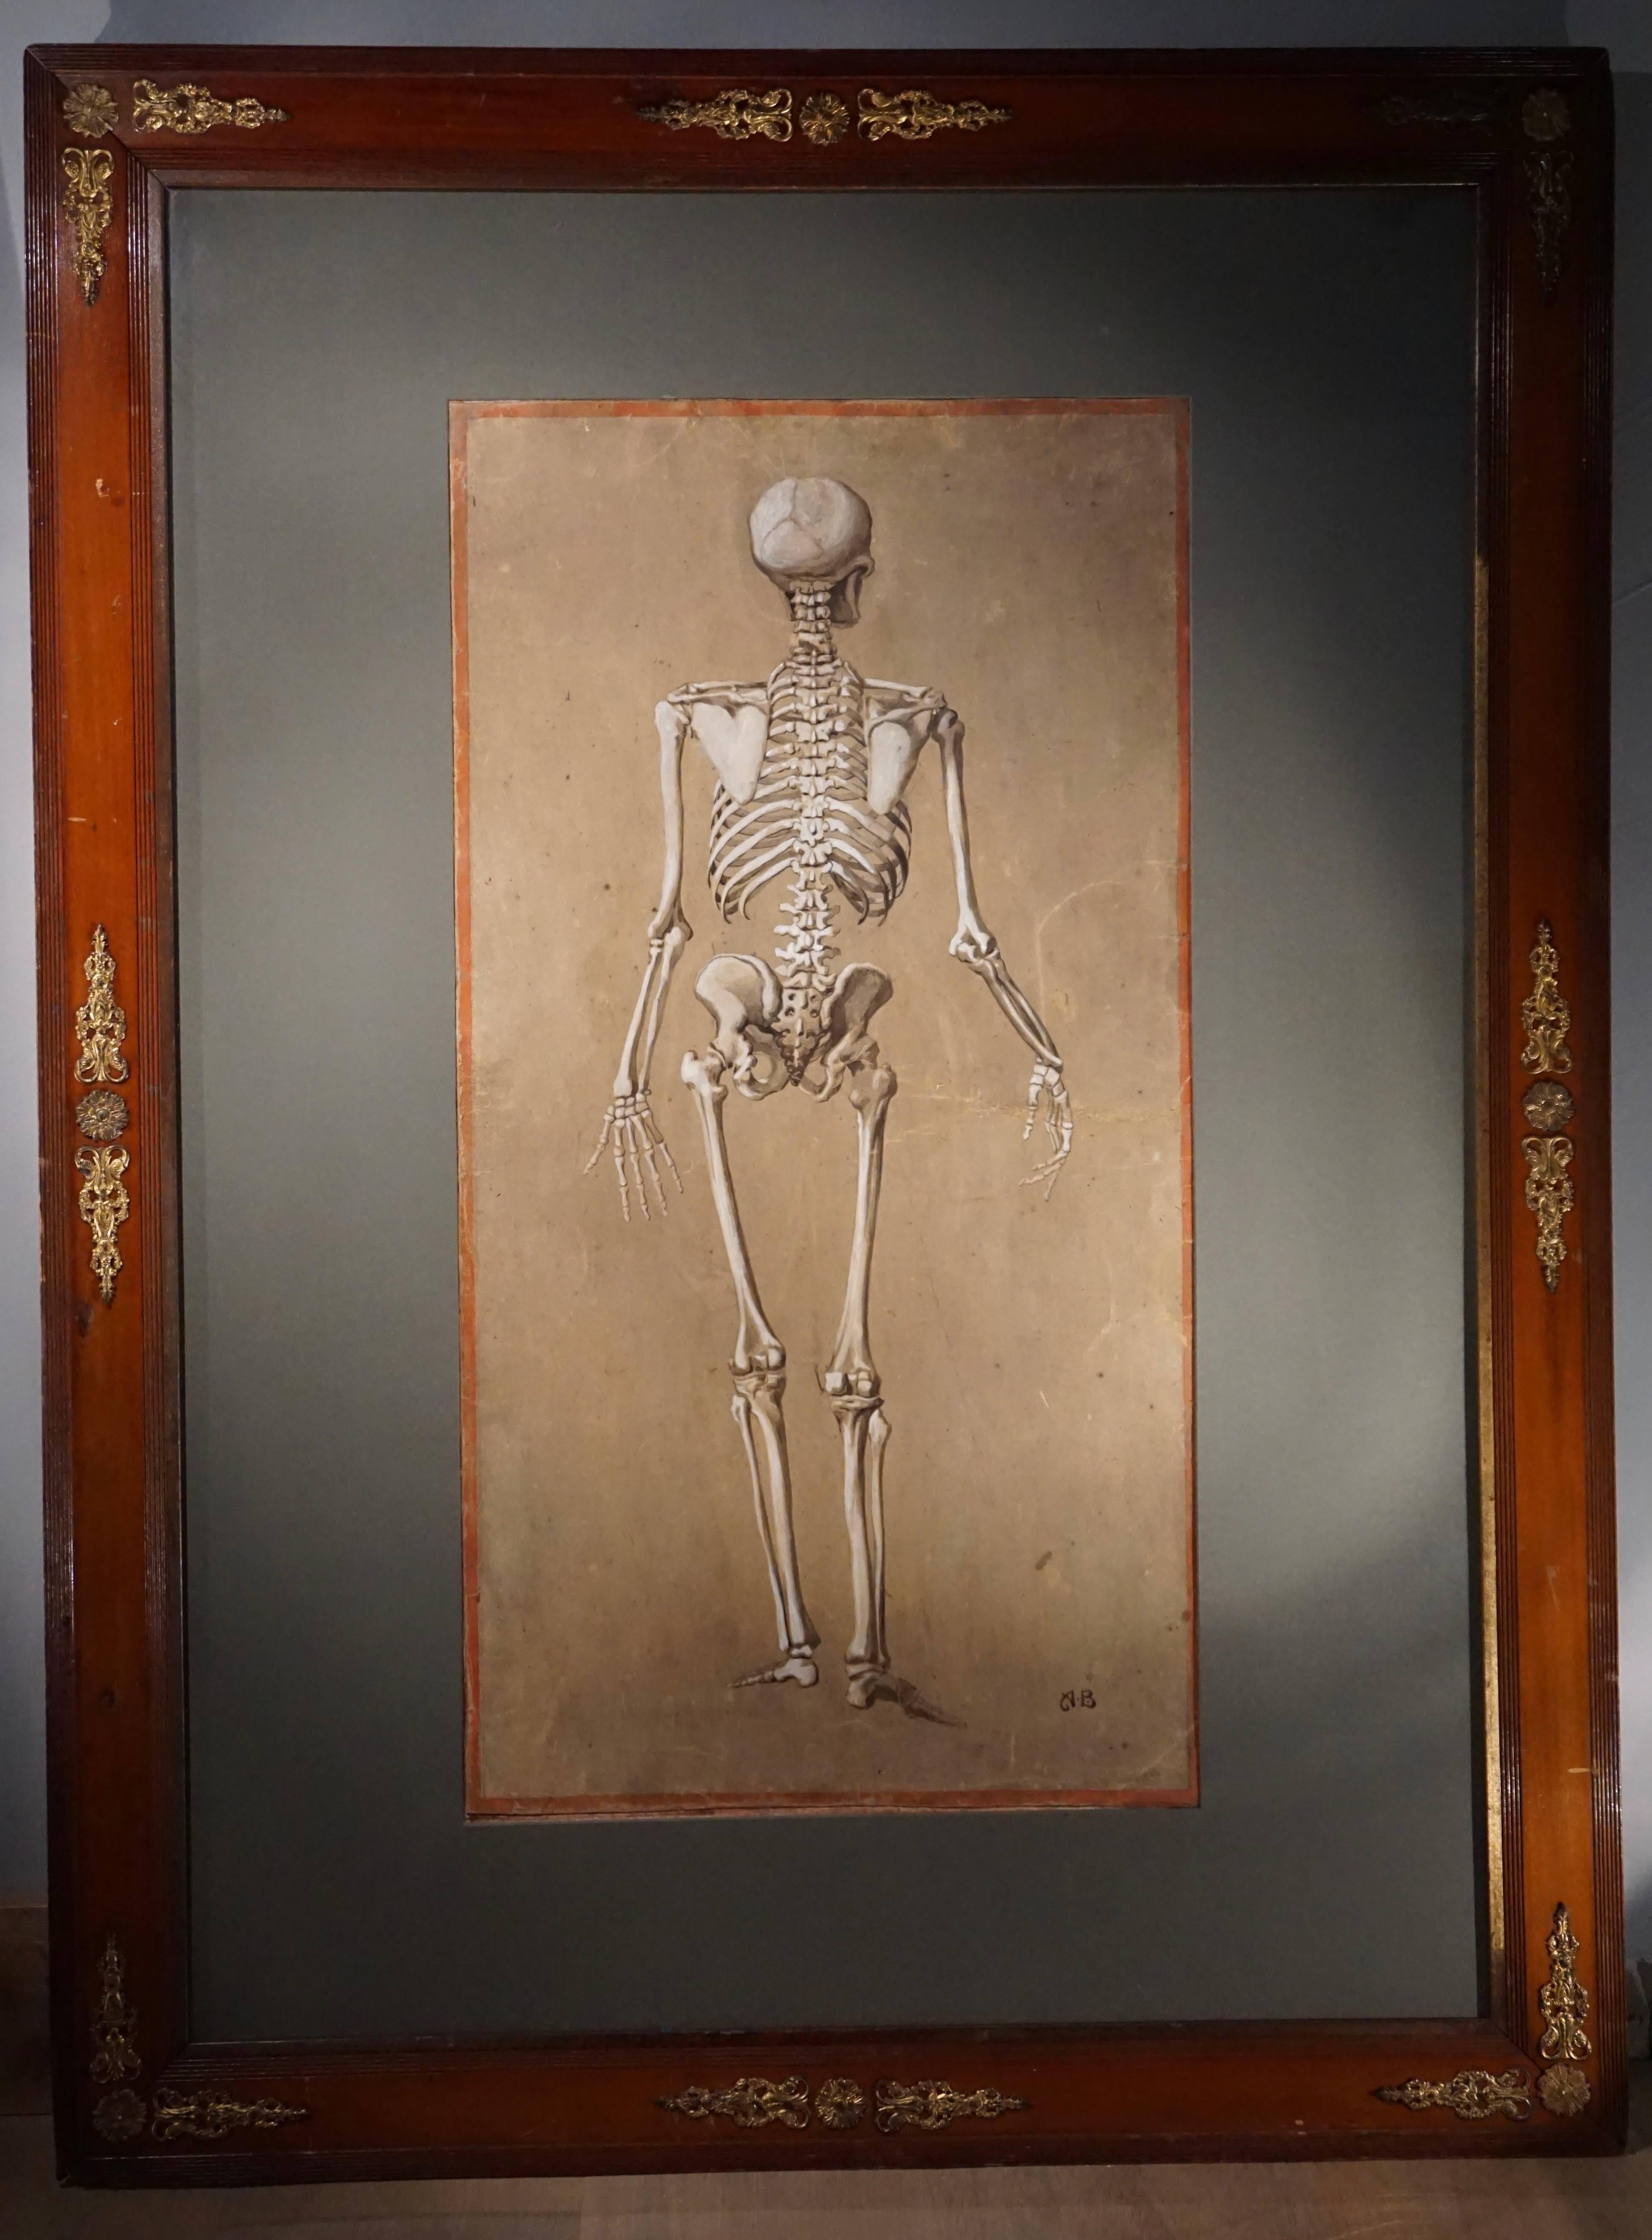 Hand-Painted Spectacular and Rare Pair of Watercolor Paintings Representing a Skeleton